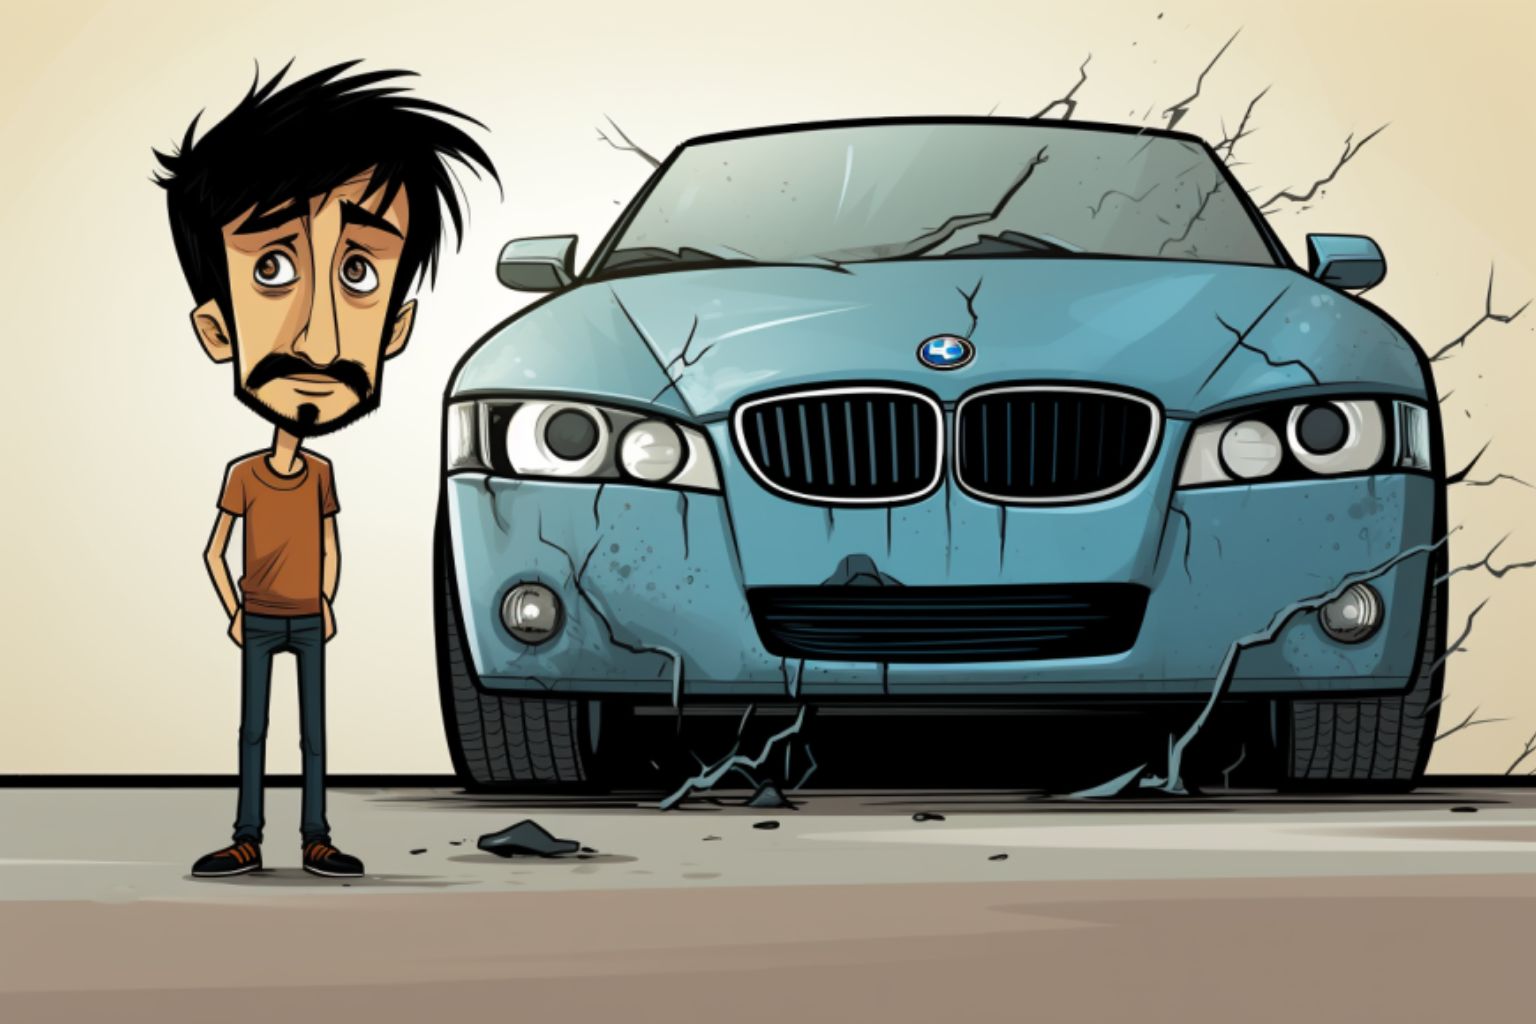 Nicholas MacIlvaine's problem with his BMW 3 Series is common. Unfortunately, the resolution is even more common.